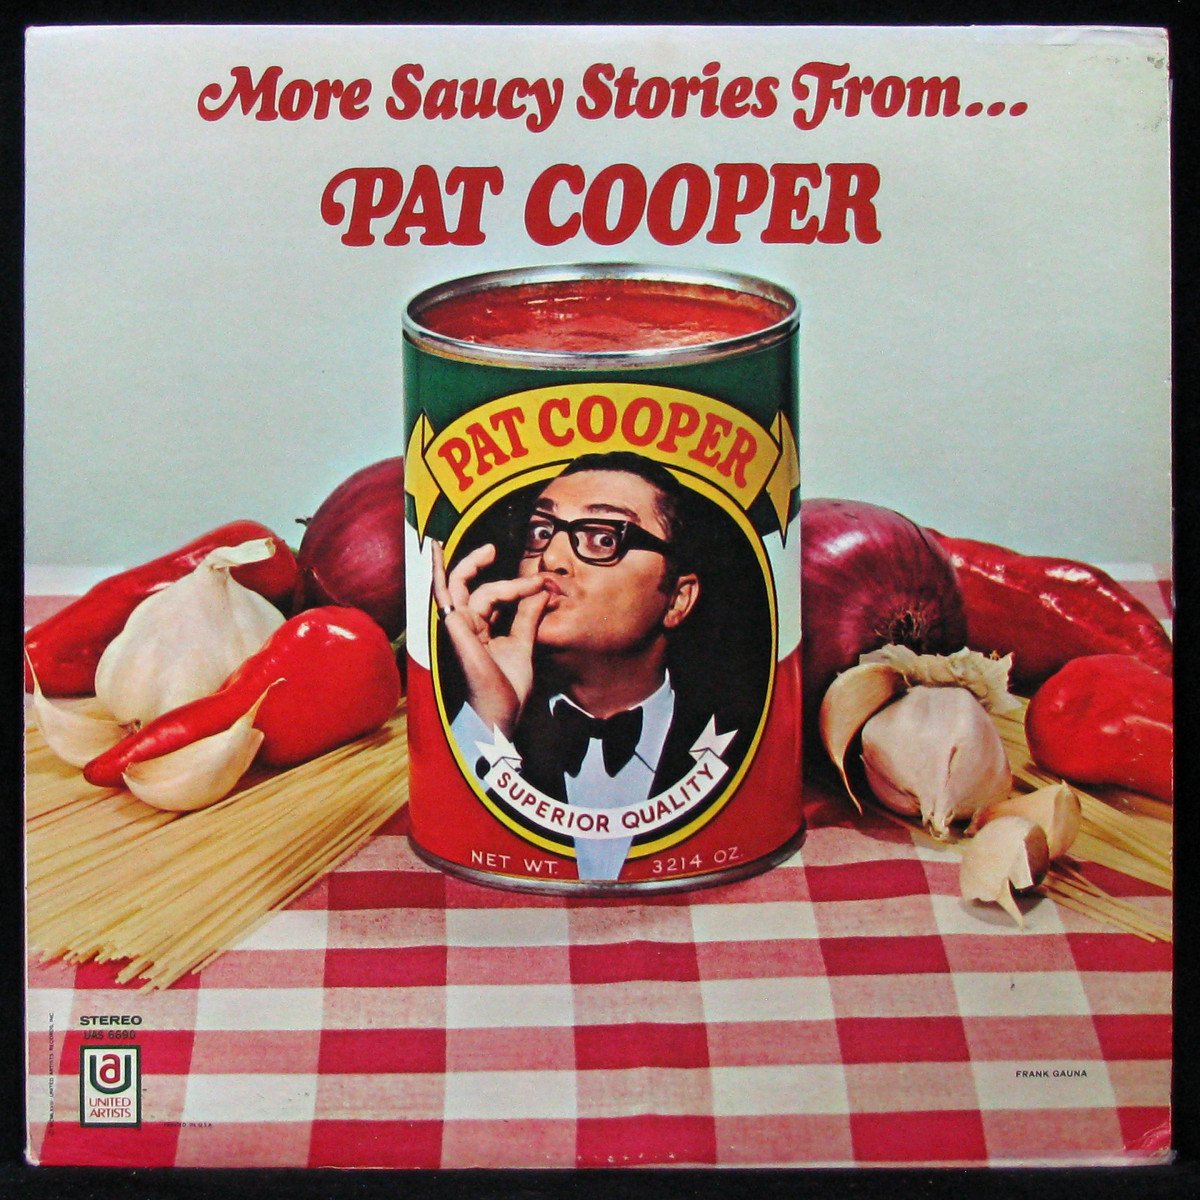 More Saucy Stories From Pat Cooper